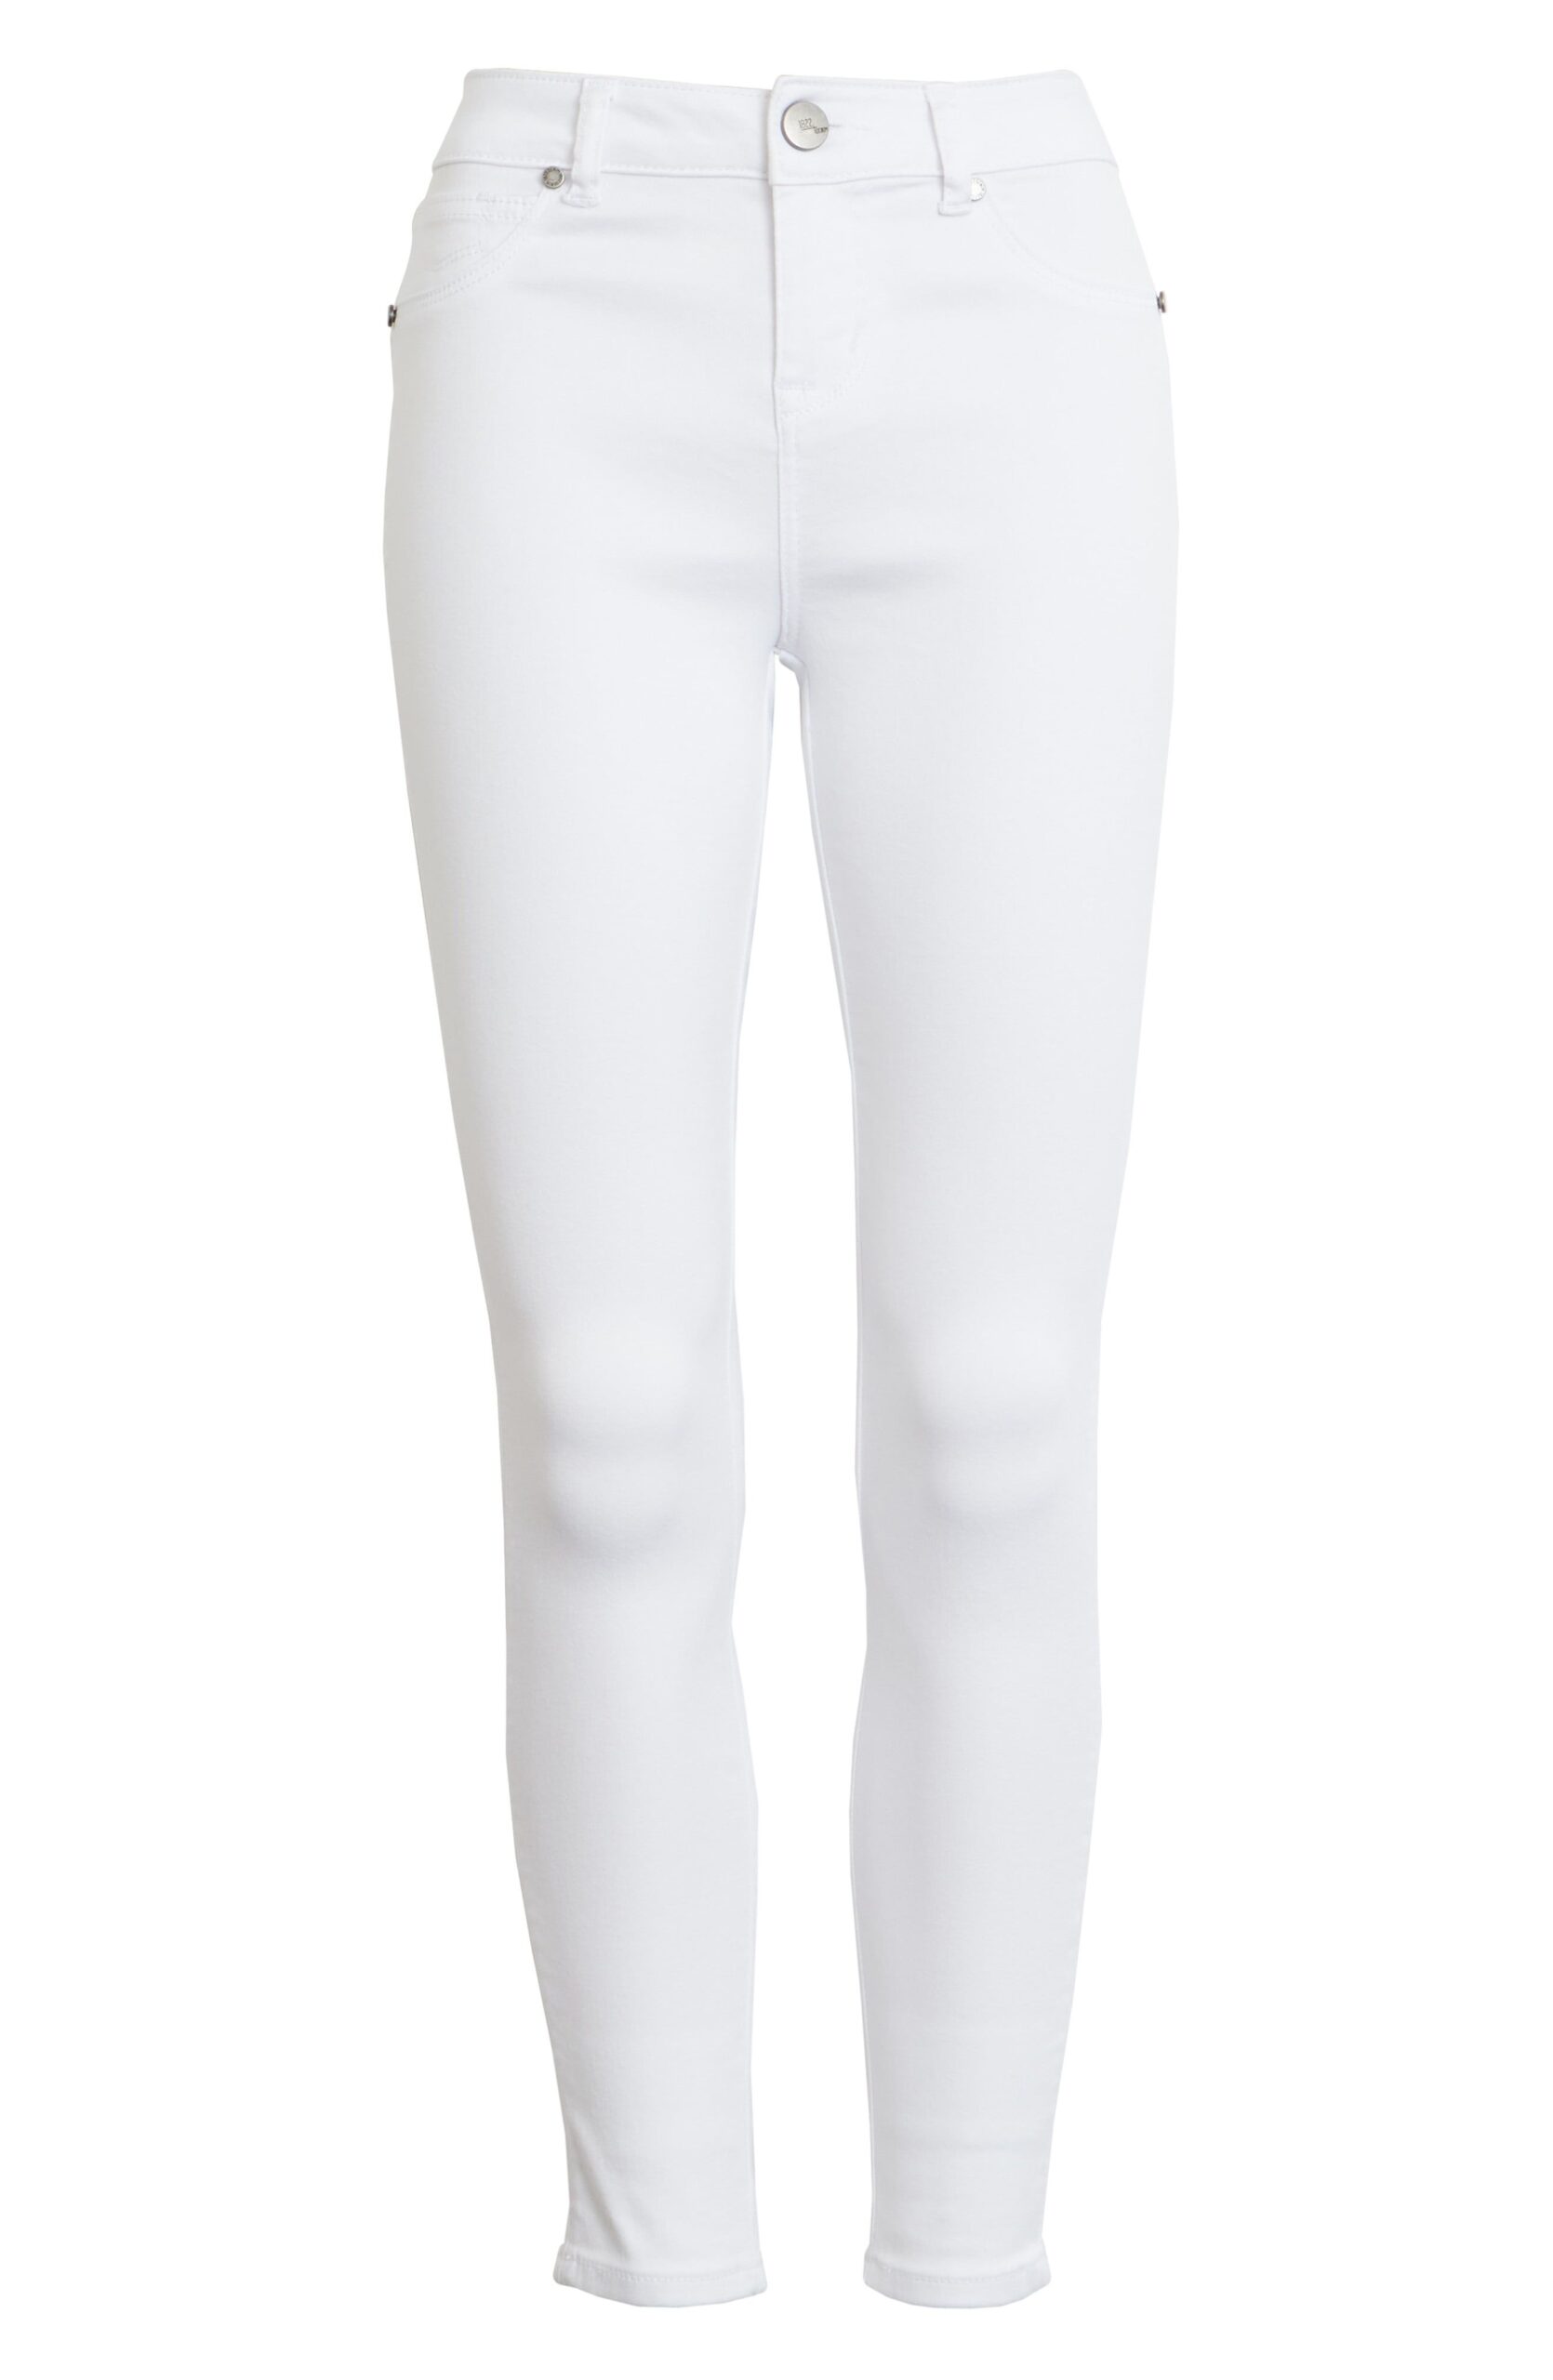 13 Refreshing White Skinny Jeans Outfit Ideas for Ladies